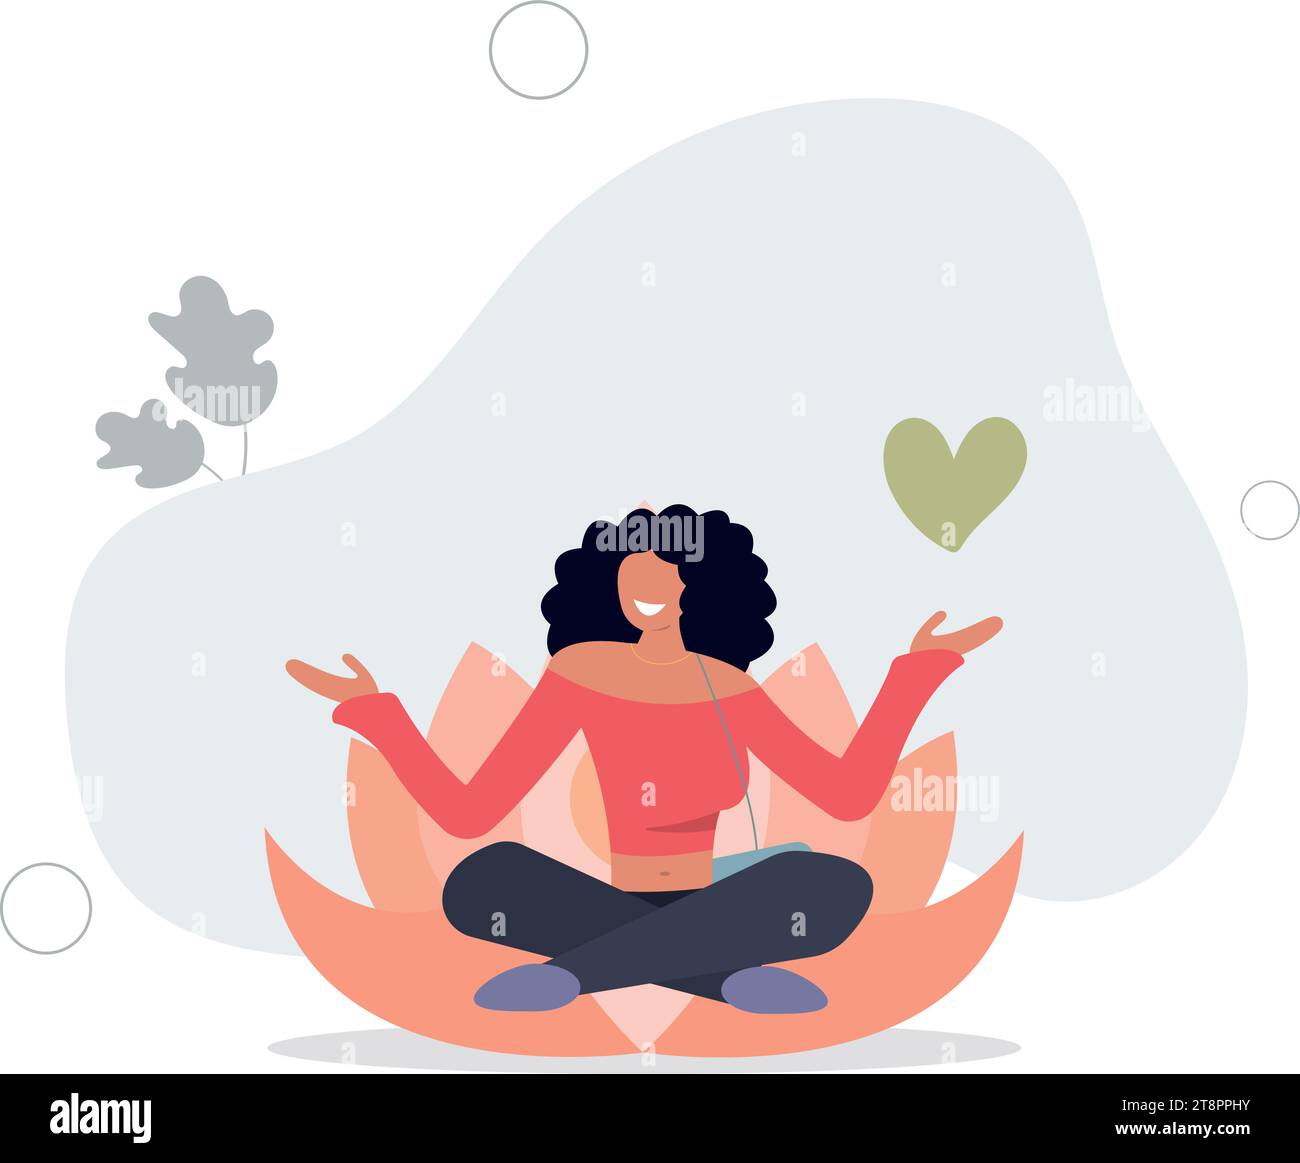 Meditation process with calm and relaxing mental practice.Mind and body harmony with peace balance. Stock Vector